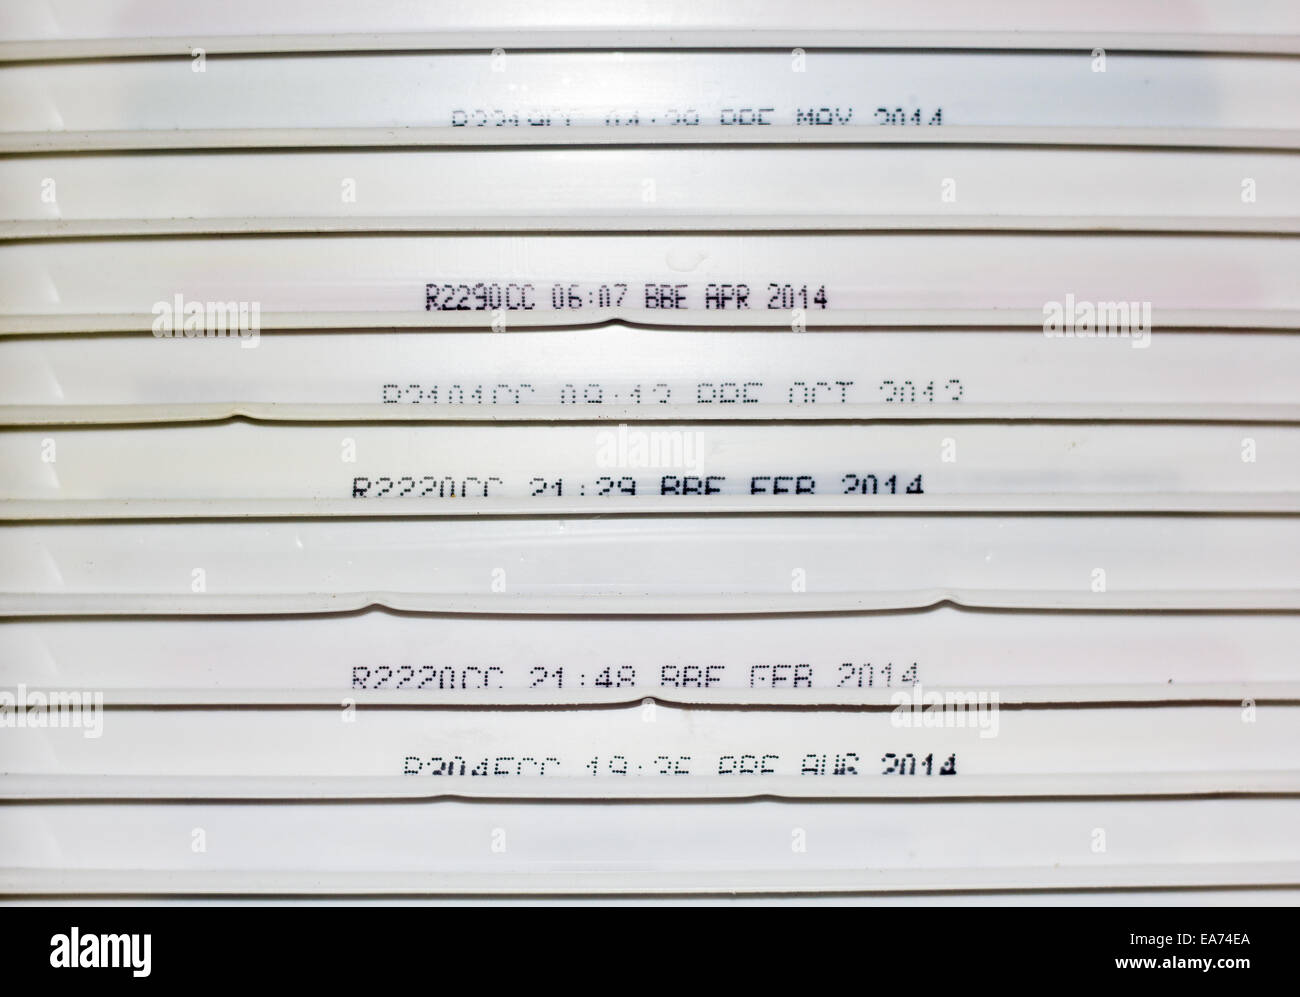 The side of old ice cream tub lids stacked on top of each other, some showing expiry and use by dates. Stock Photo